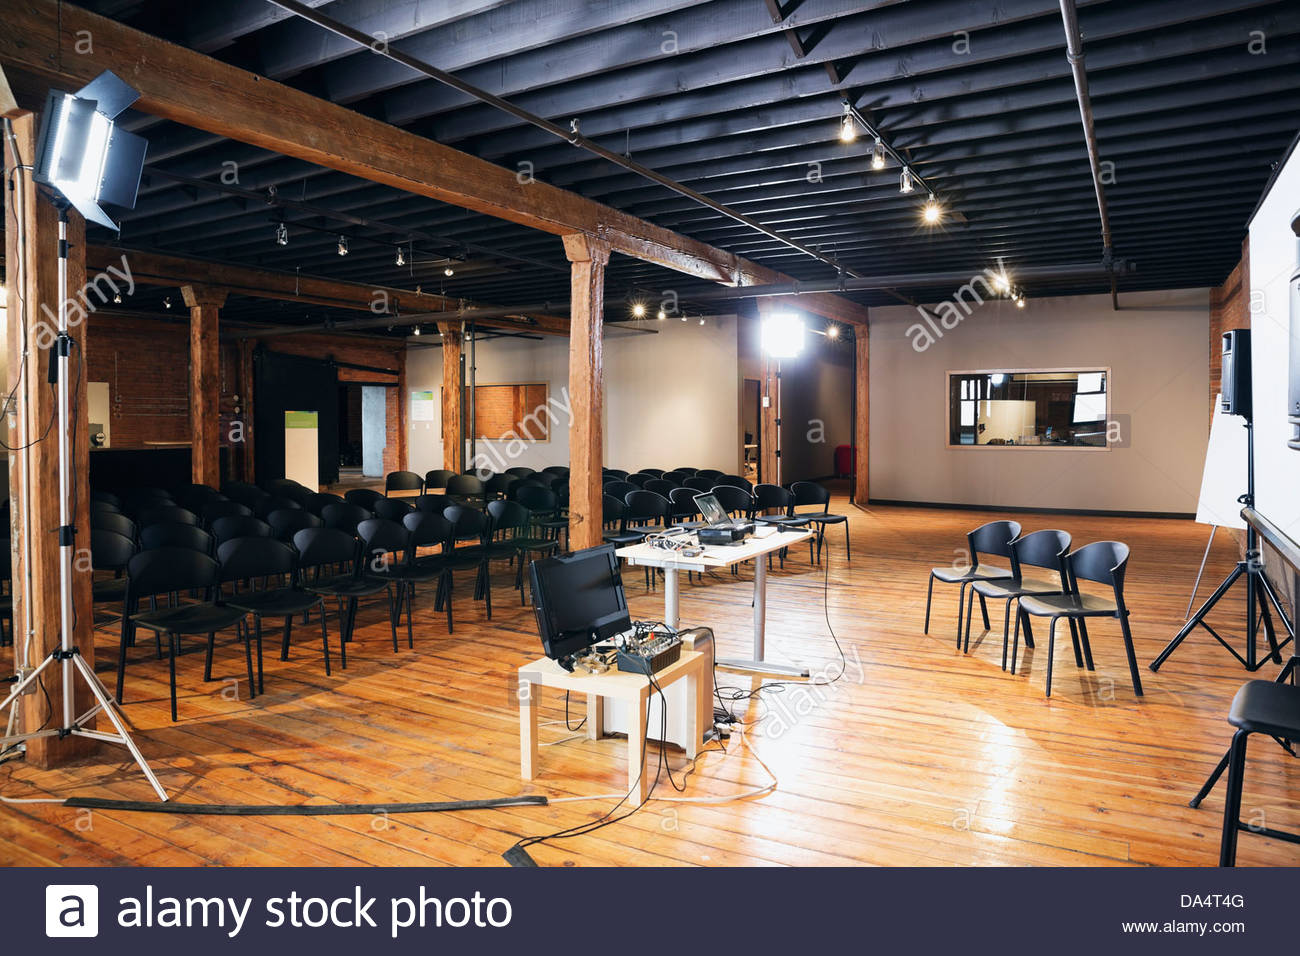 Interior of conference room with projection screen and chairs Stock Photo